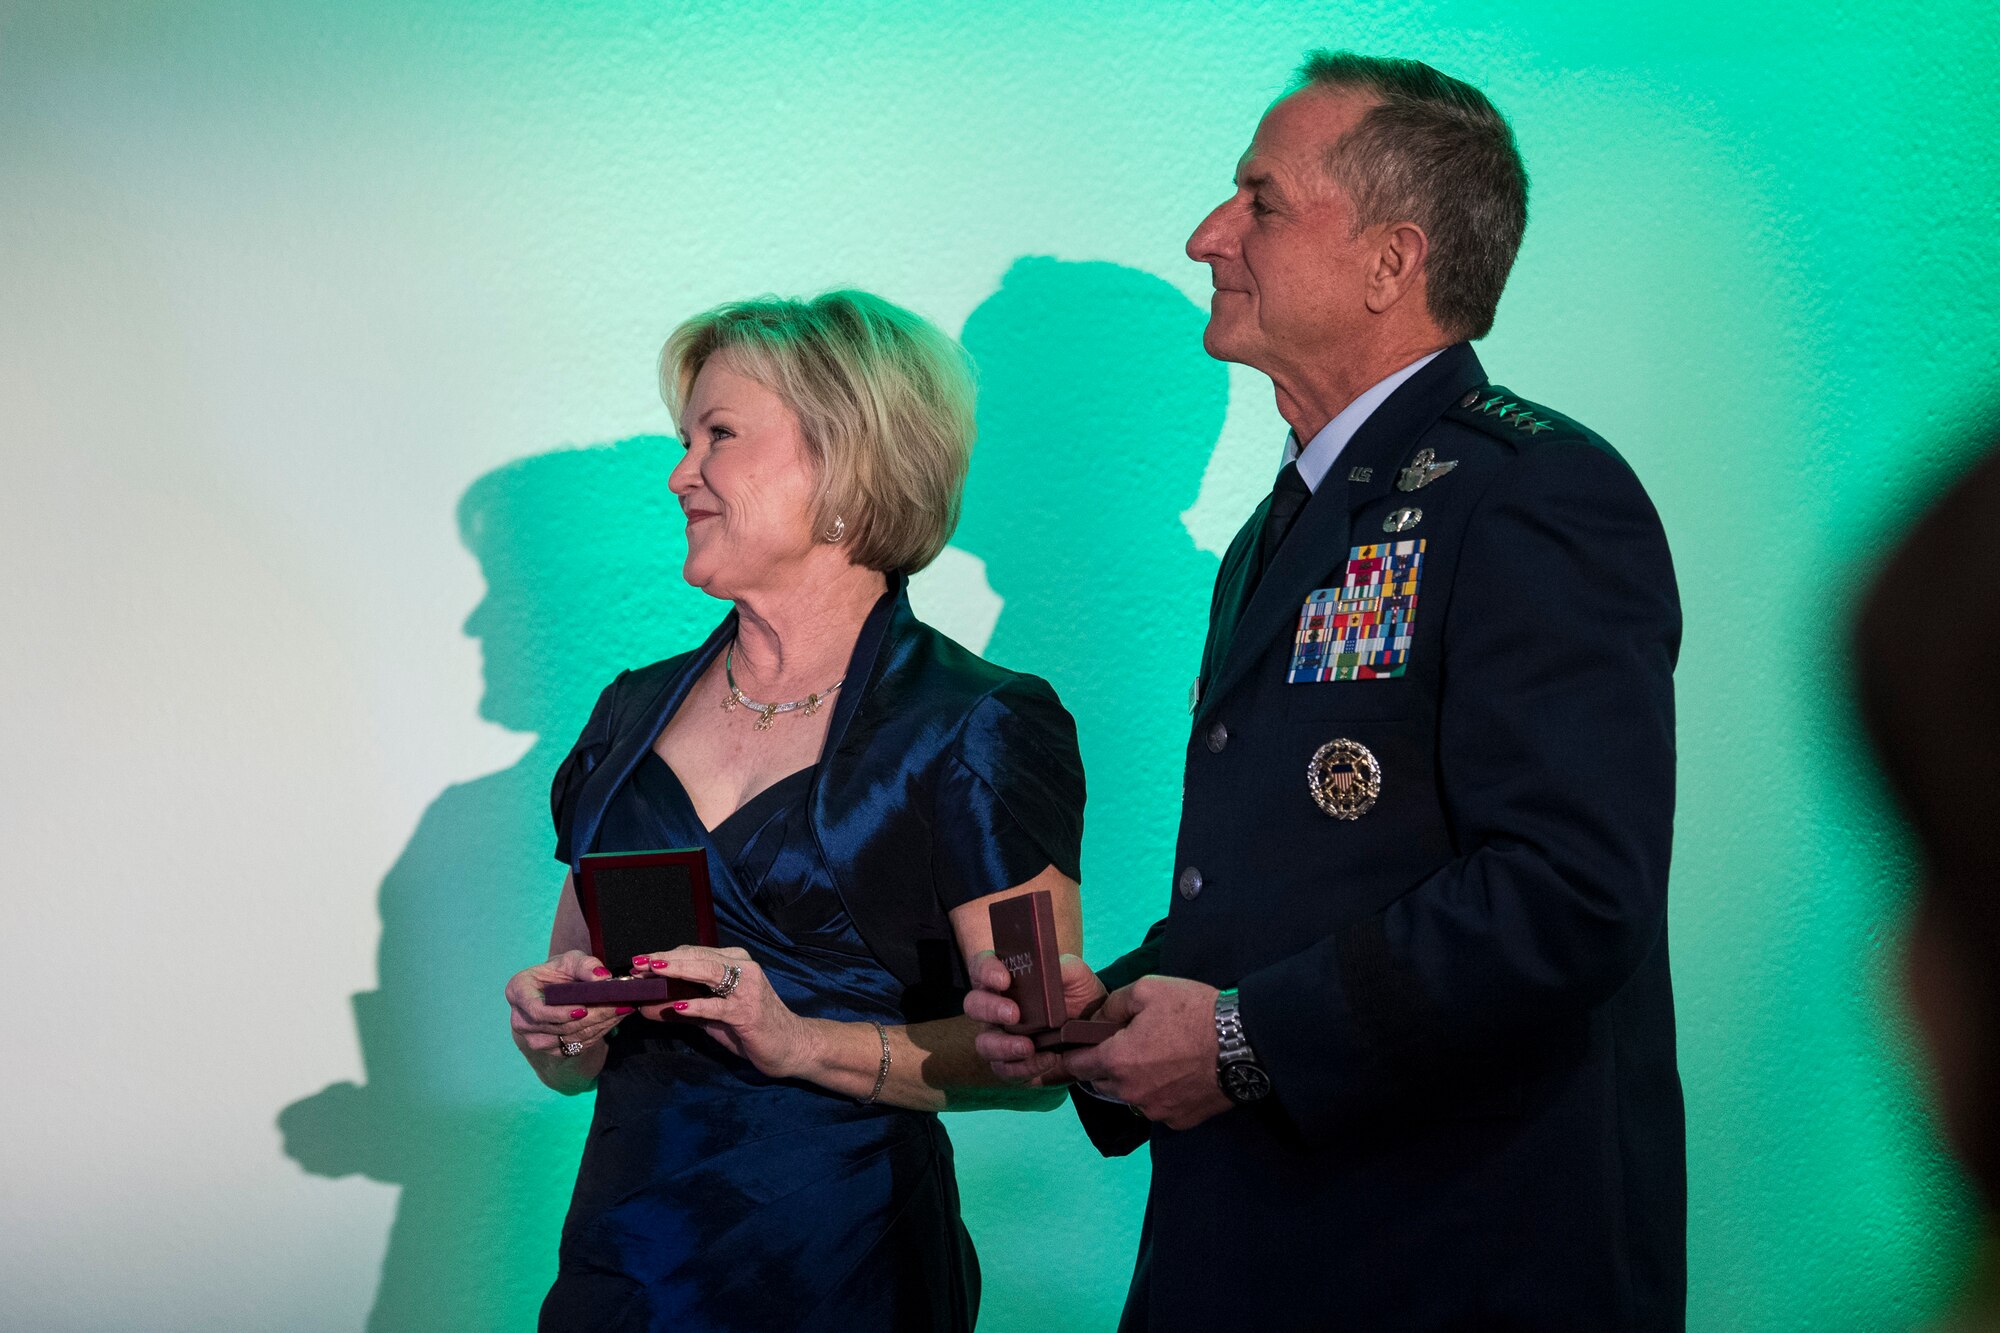 Air Force Chief of Staff Gen. David L. Goldfein speaks during the banquet celebrating the 50th reunion of the Jolly Green Association (JGA), May 4, 2019, in Fort Walton Beach, Fla. The JGA presented Airmen from the 41st Rescue Squadron (RQS) and the 48th RQS with the Rescue Mission of the Year award; the only non Air Force award recognized by the Air Force. (U.S. Air Force Photo by Staff Sgt. Janiqua P. Robinson)